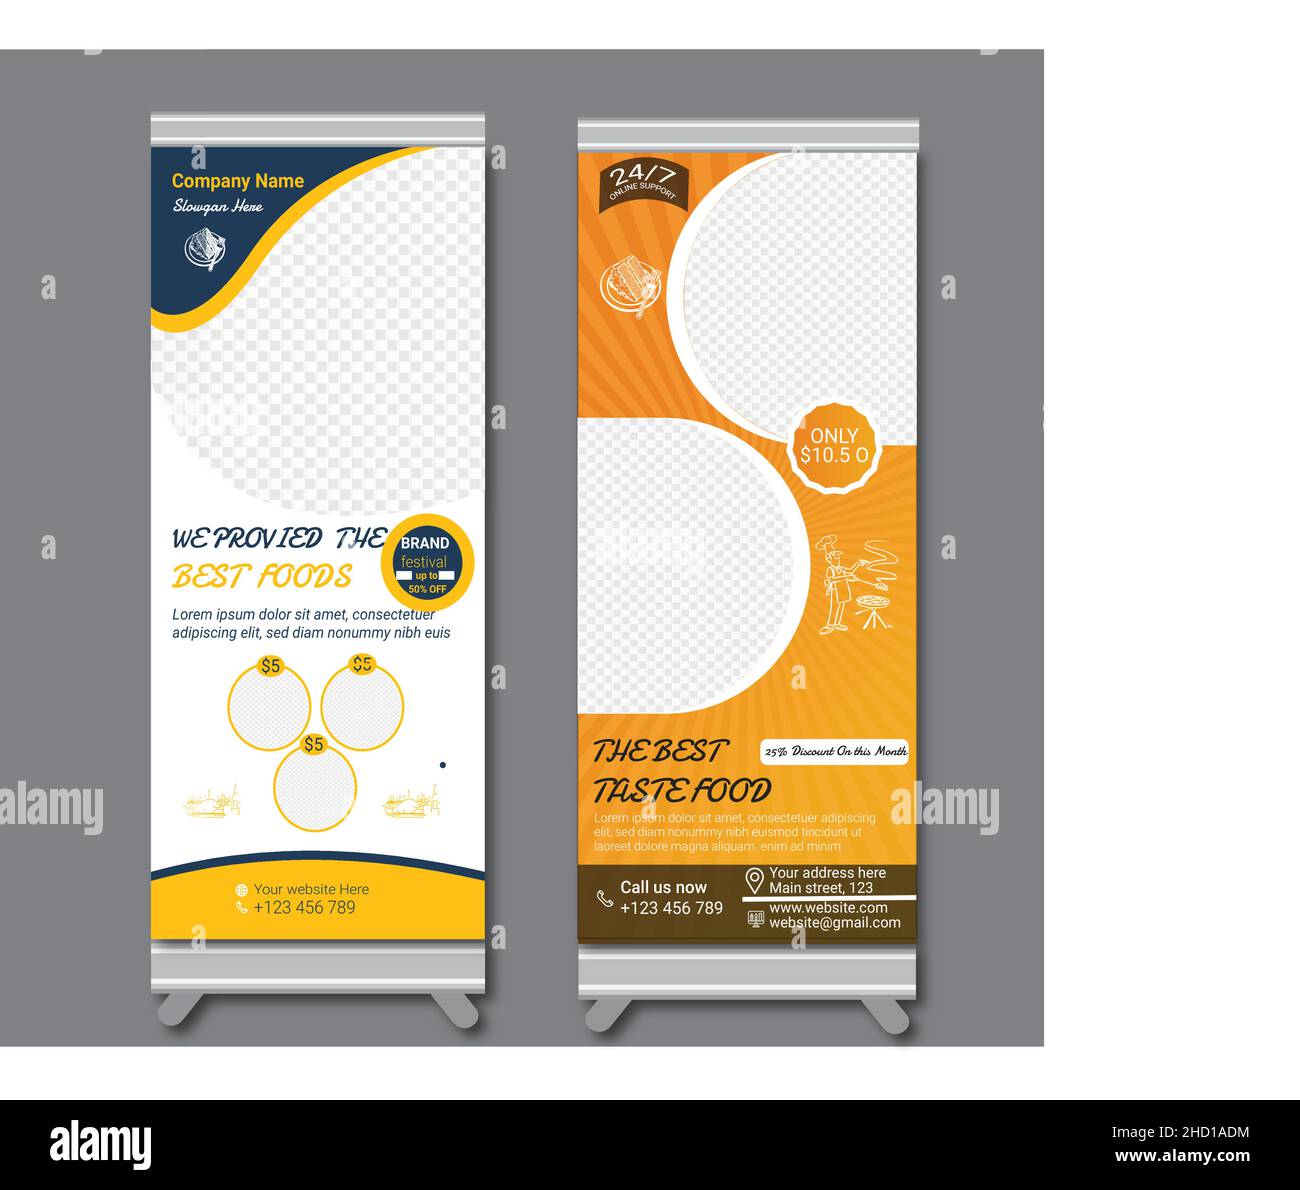 Stampa Ready Roll Up Banner Template Design for Food $ Restaurant business Illustrazione Vettoriale